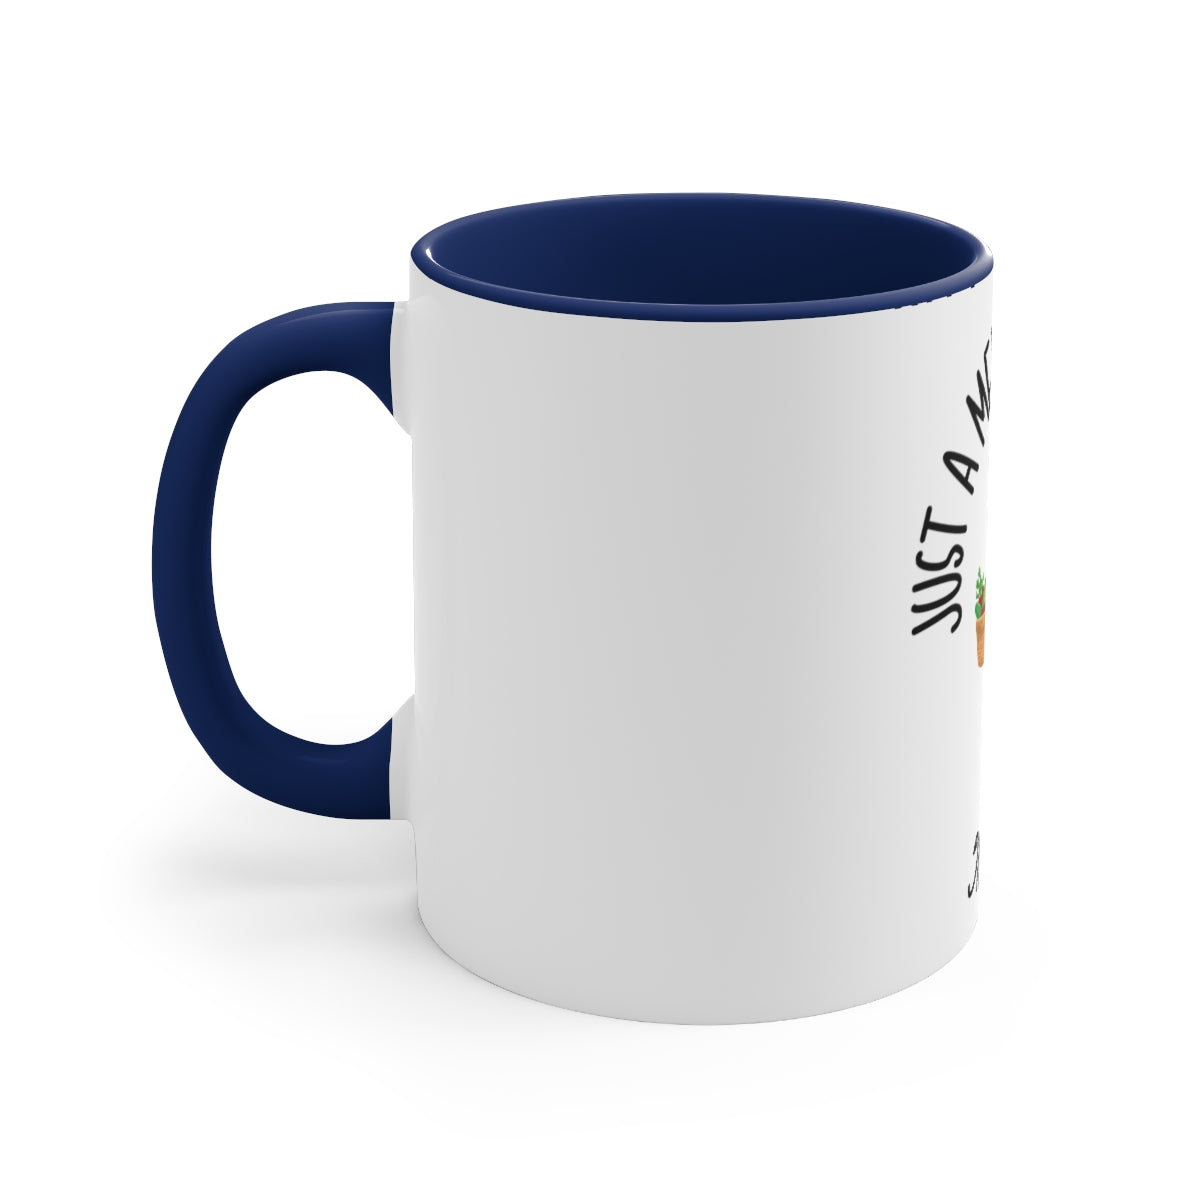 Memaw Gift Just A Memaw Who Loves Gardening Coffee Mug 11 ounce Coffee or Tea Cup Gift For Memaw